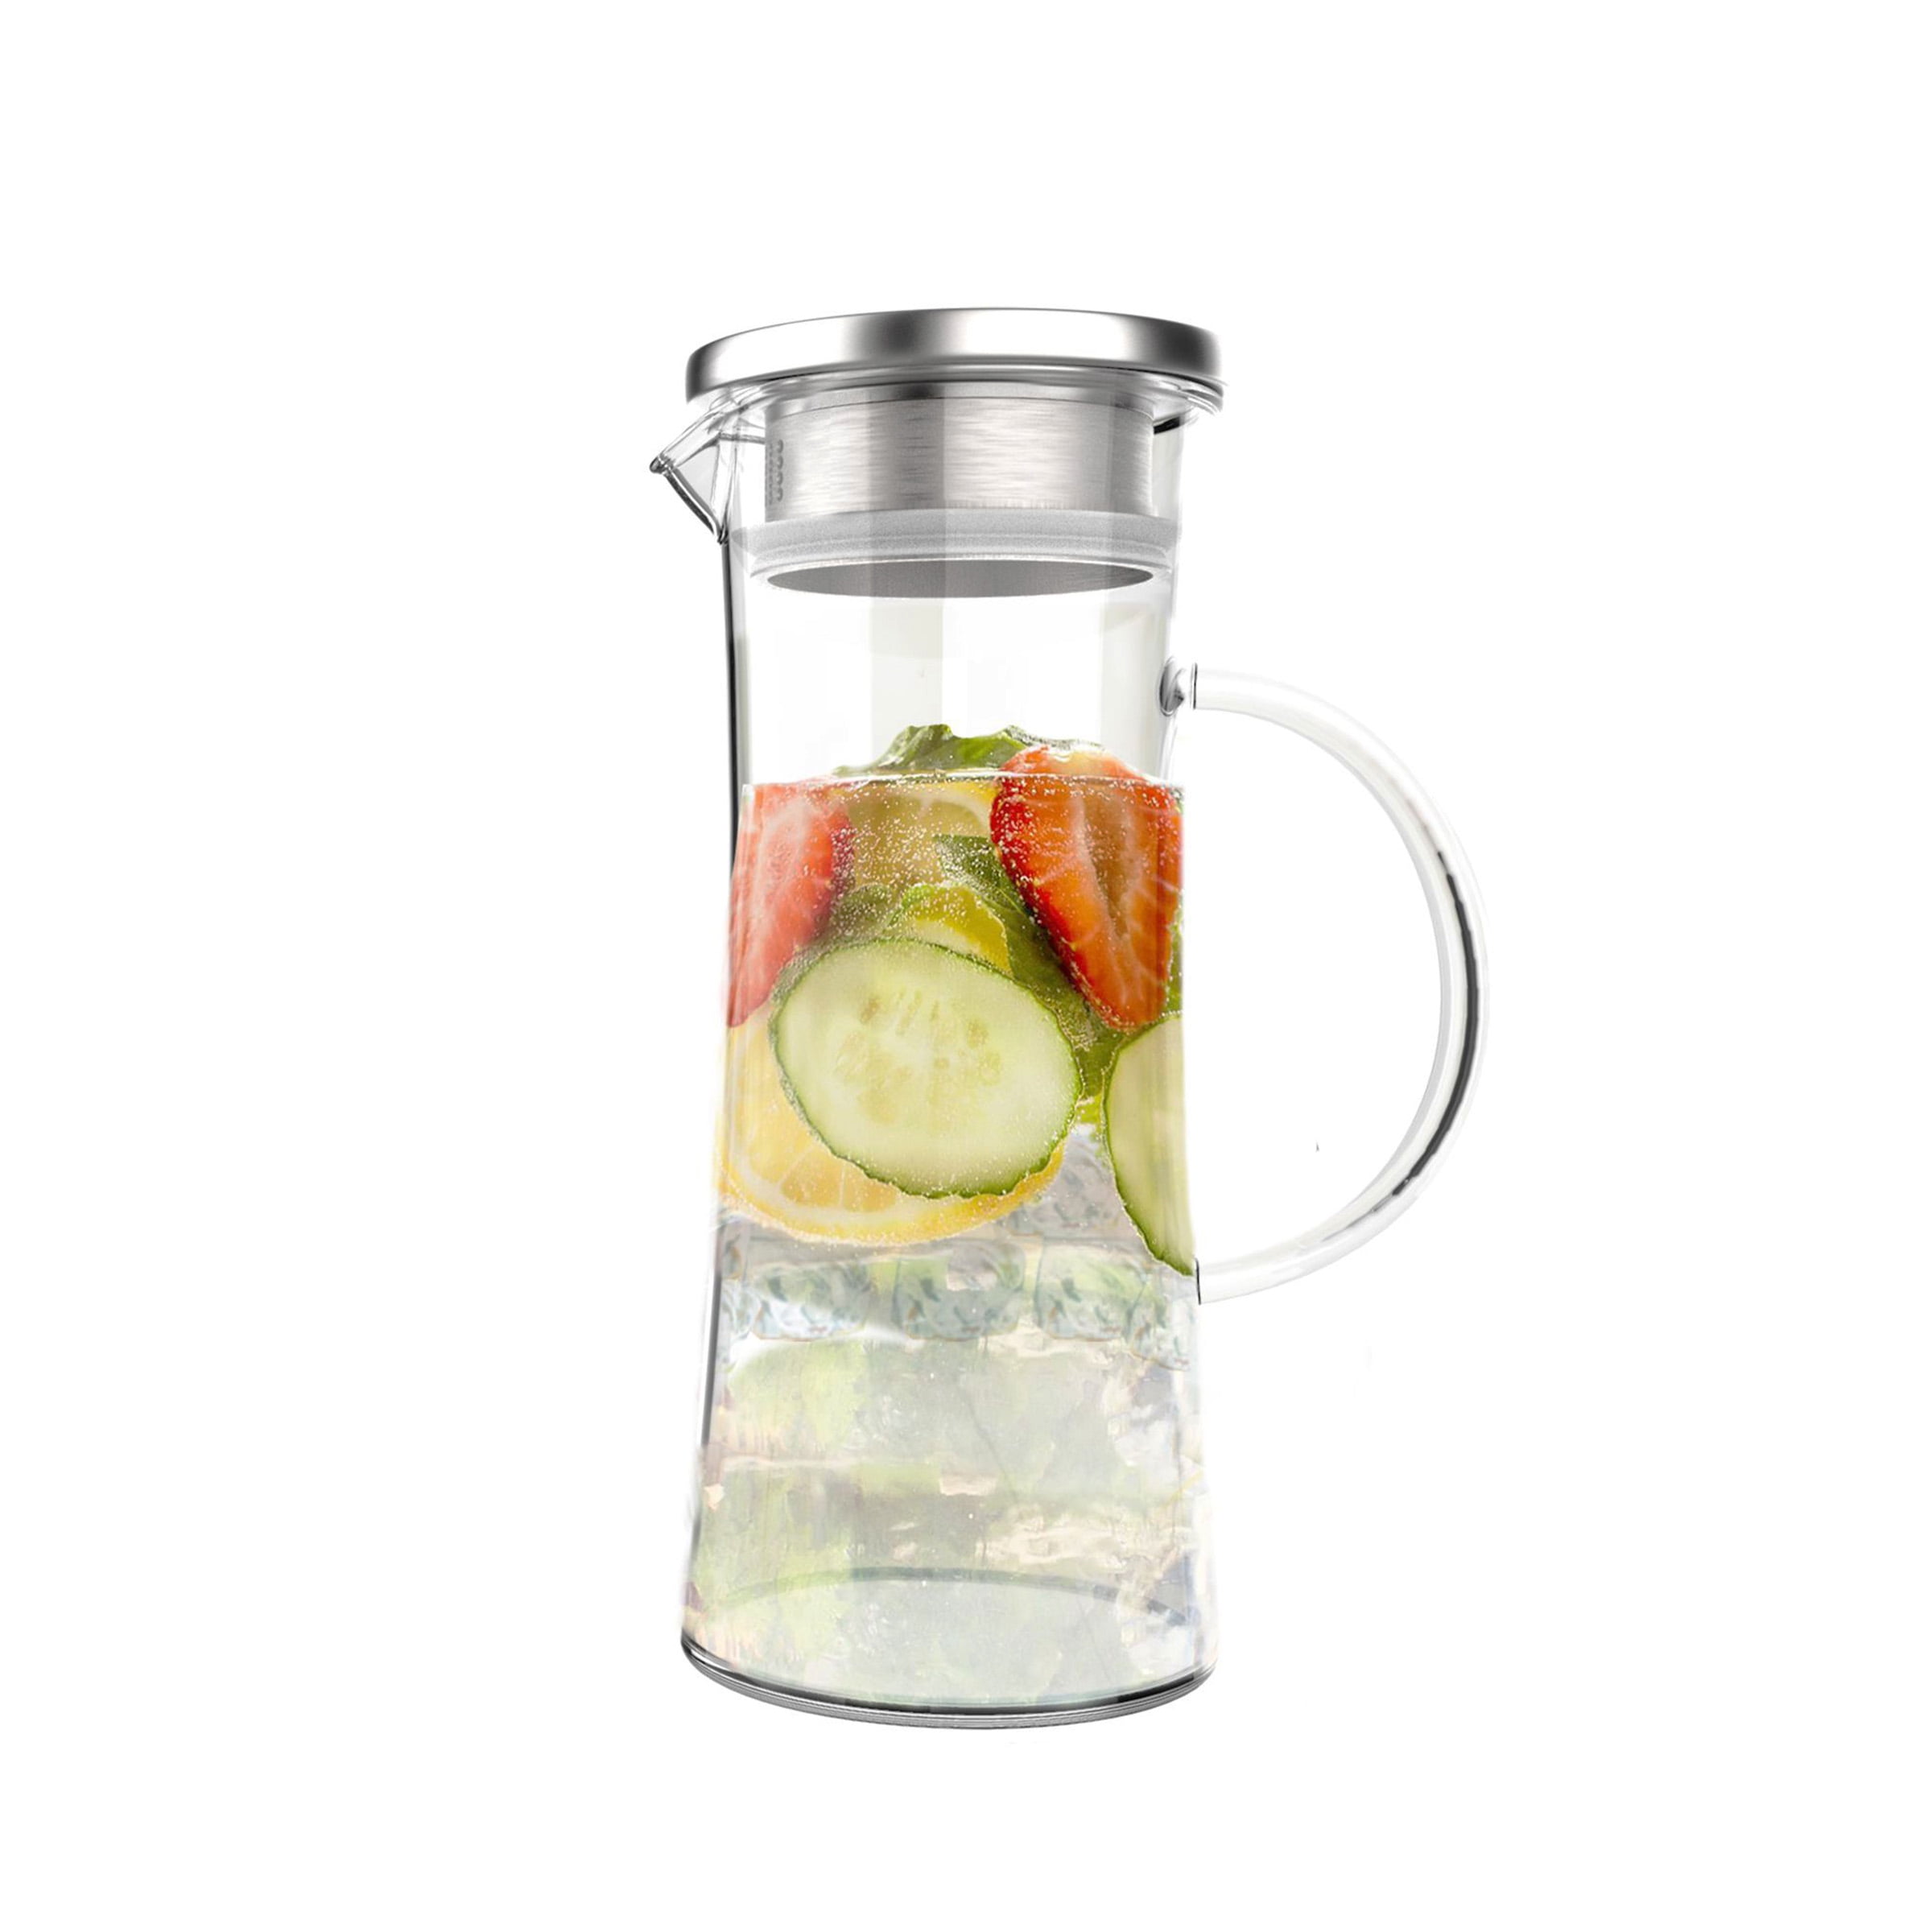 Stunning Clear Glass Pitcher Stainless Steel Lid Ergonomics Water Ice Tea Carafe 